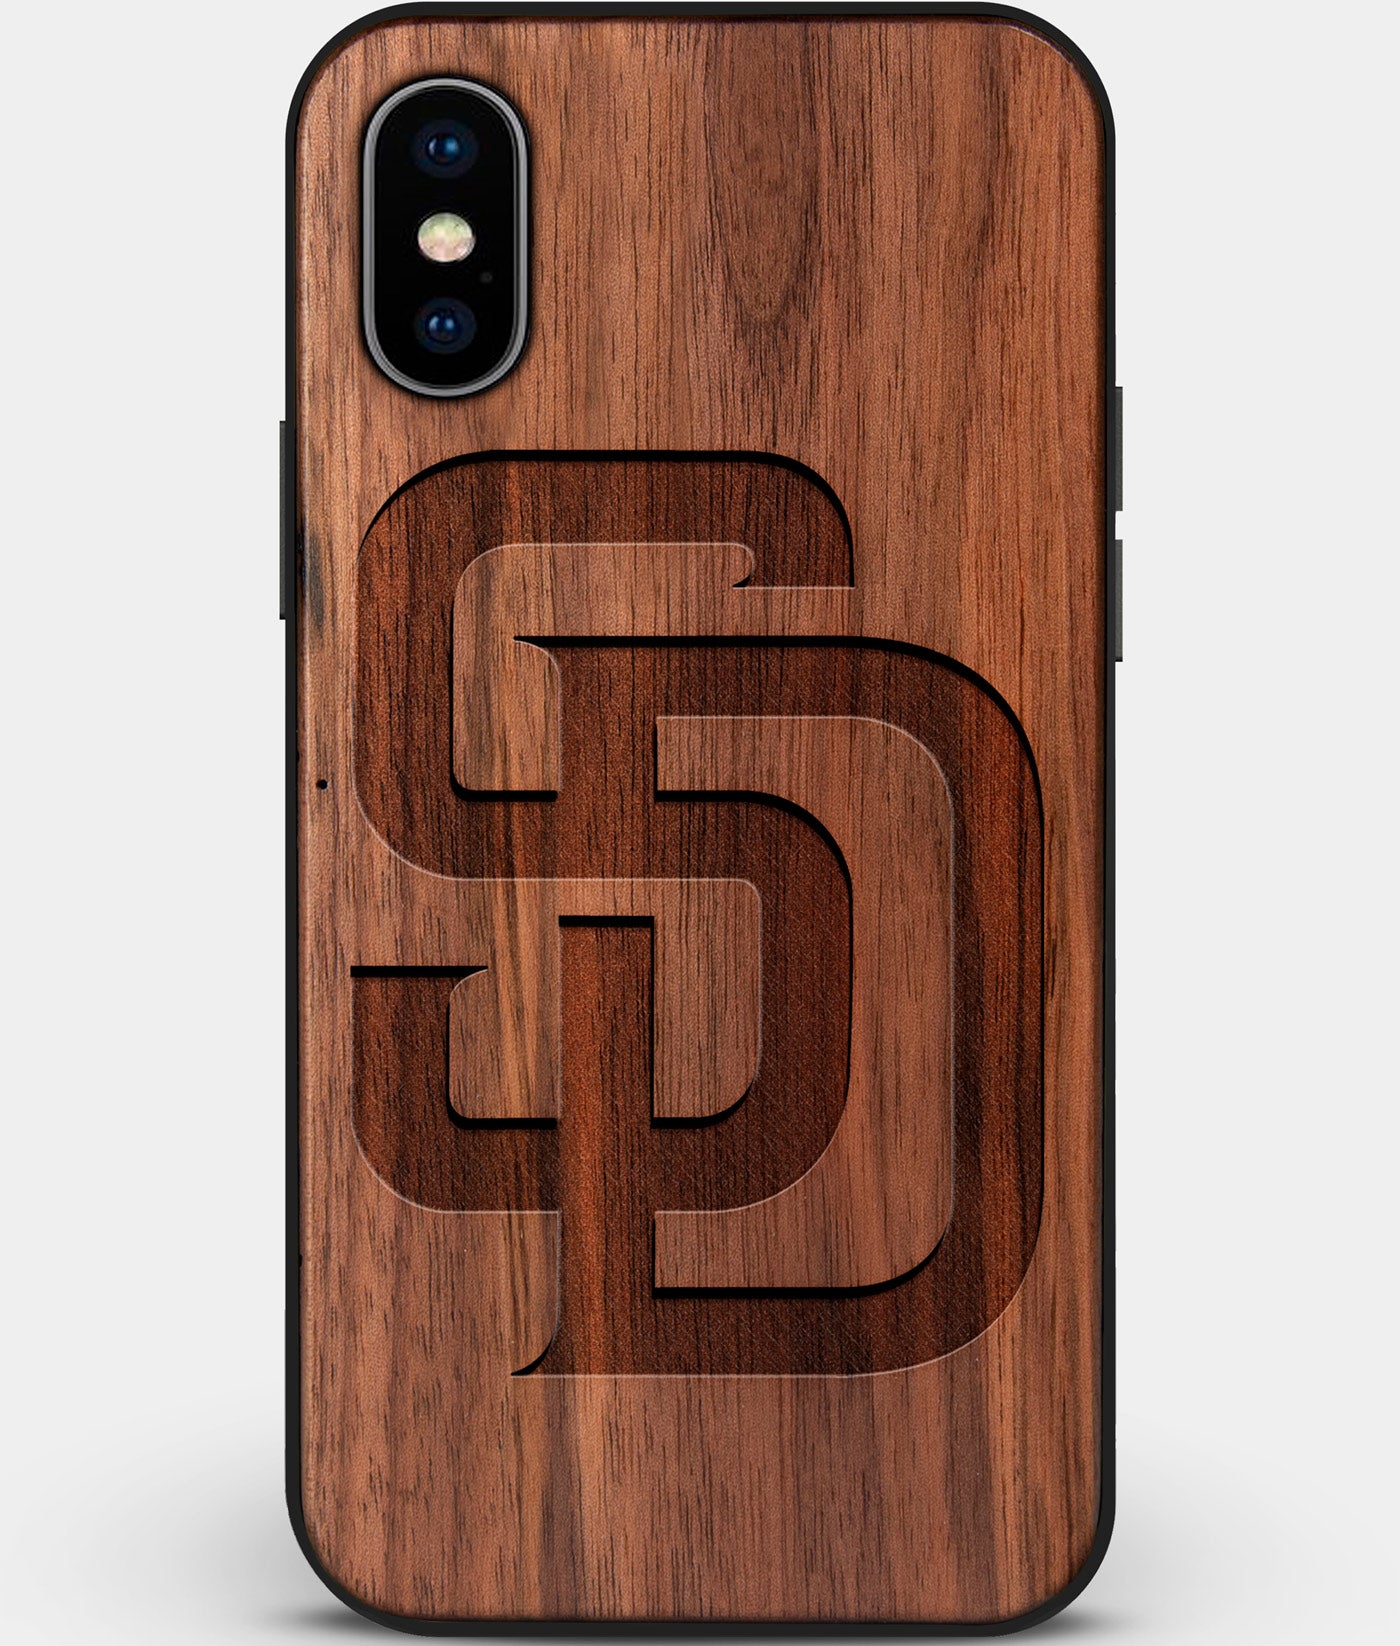 Custom Carved Wood San Diego Padres iPhone X/XS Case | Personalized Walnut Wood San Diego Padres Cover, Birthday Gift, Gifts For Him, Monogrammed Gift For Fan | by Engraved In Nature